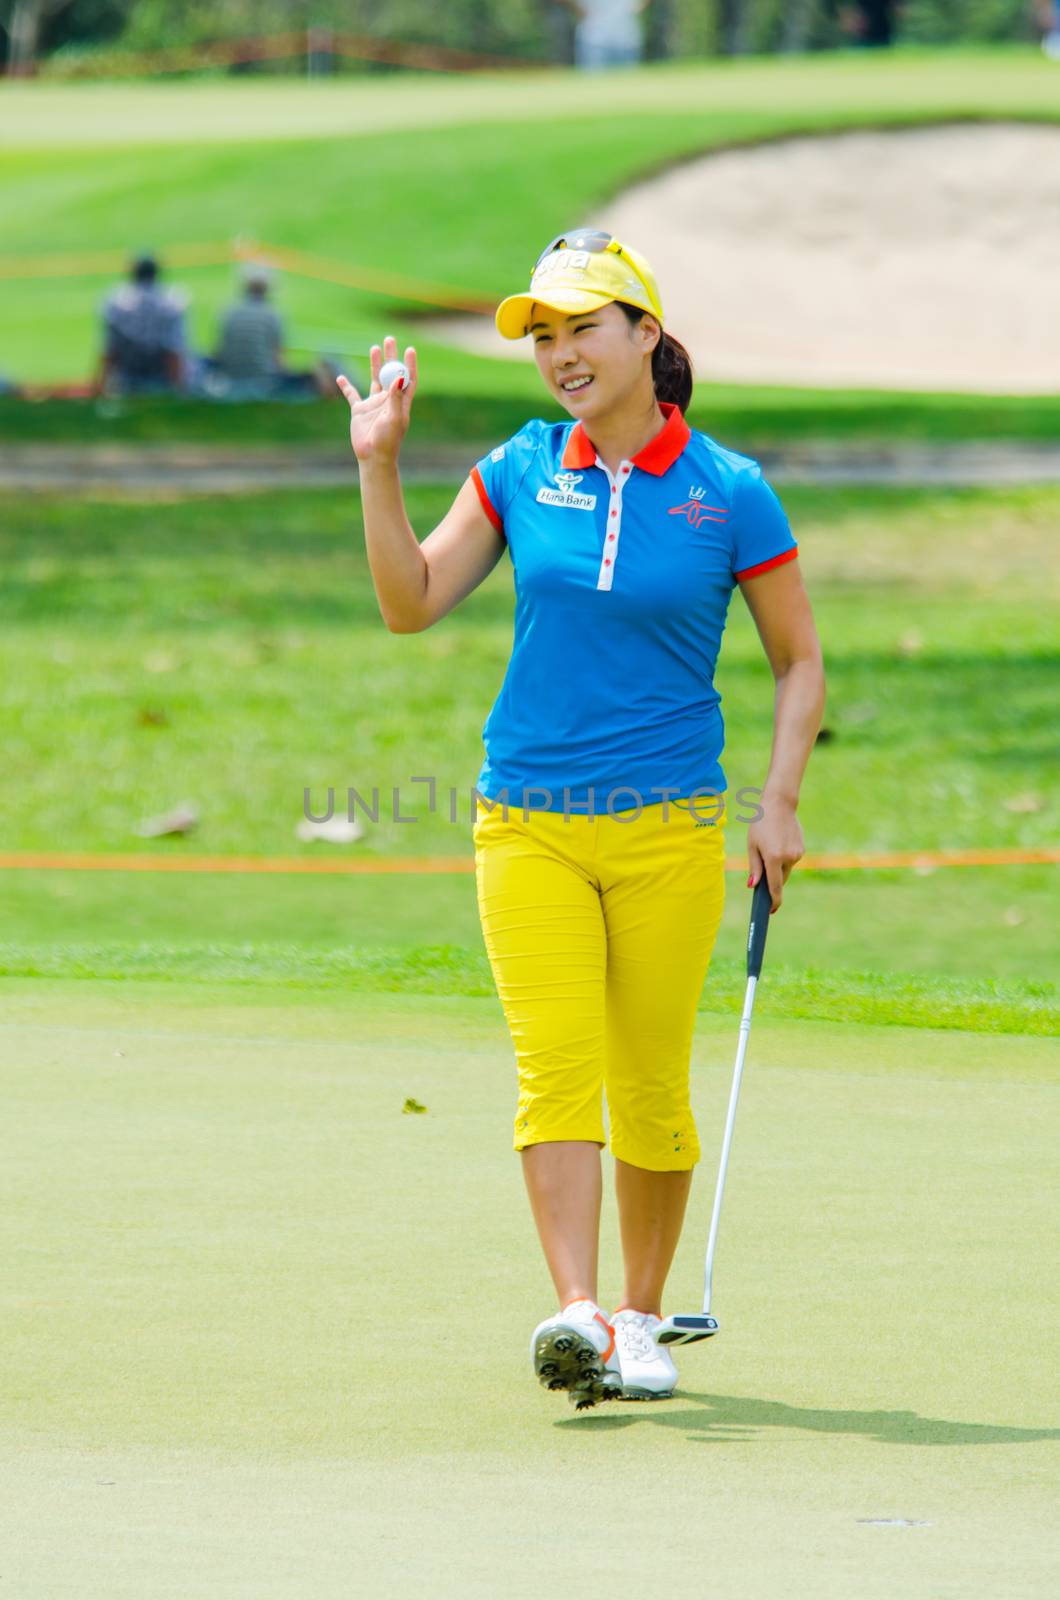 CHONBURI - FEBRUARY 28: Hee Young Park of South Korea in Honda LPGA Thailand 2015 at Siam Country Club, Pattaya Old Course on February 28, 2015 in Chonburi, Thailand.